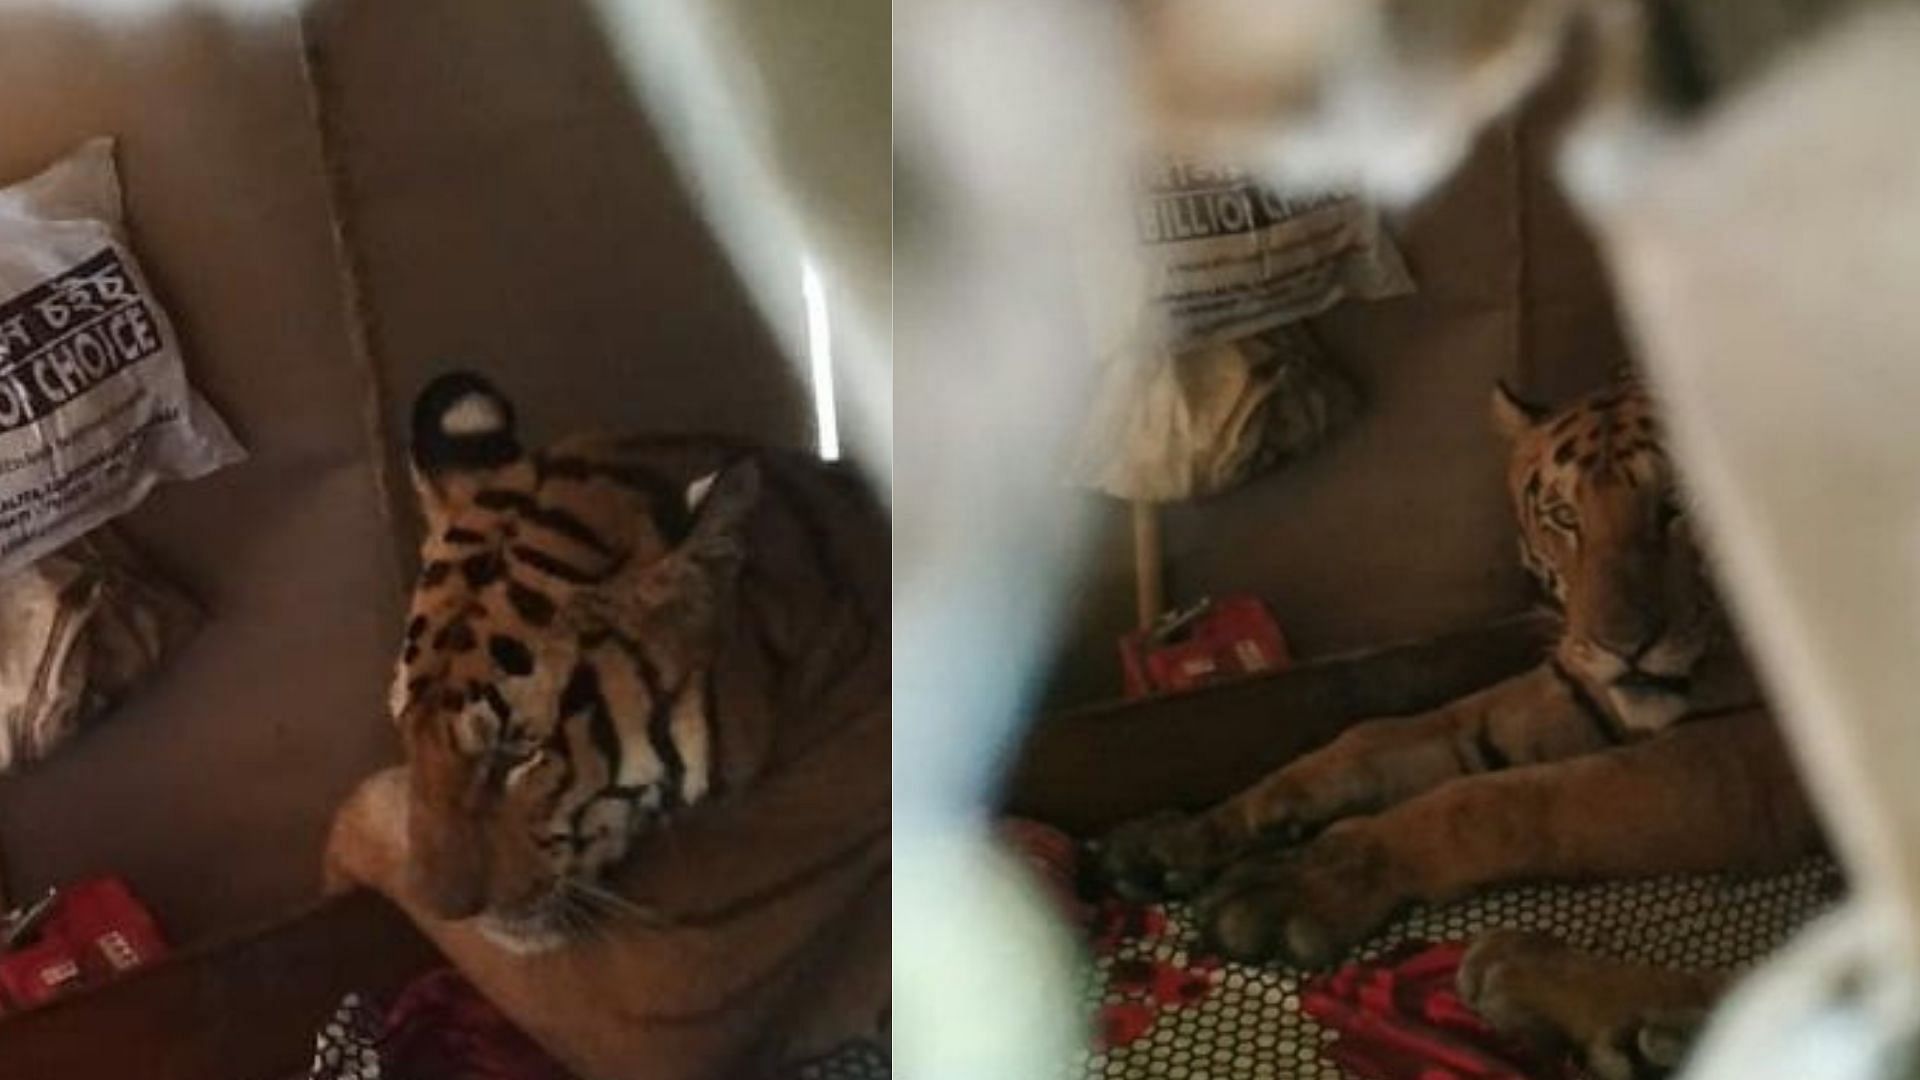 A Bengal tiger was found sitting on a bed in a house in flood-hit Harmati area of Assam’s Kaziranga.